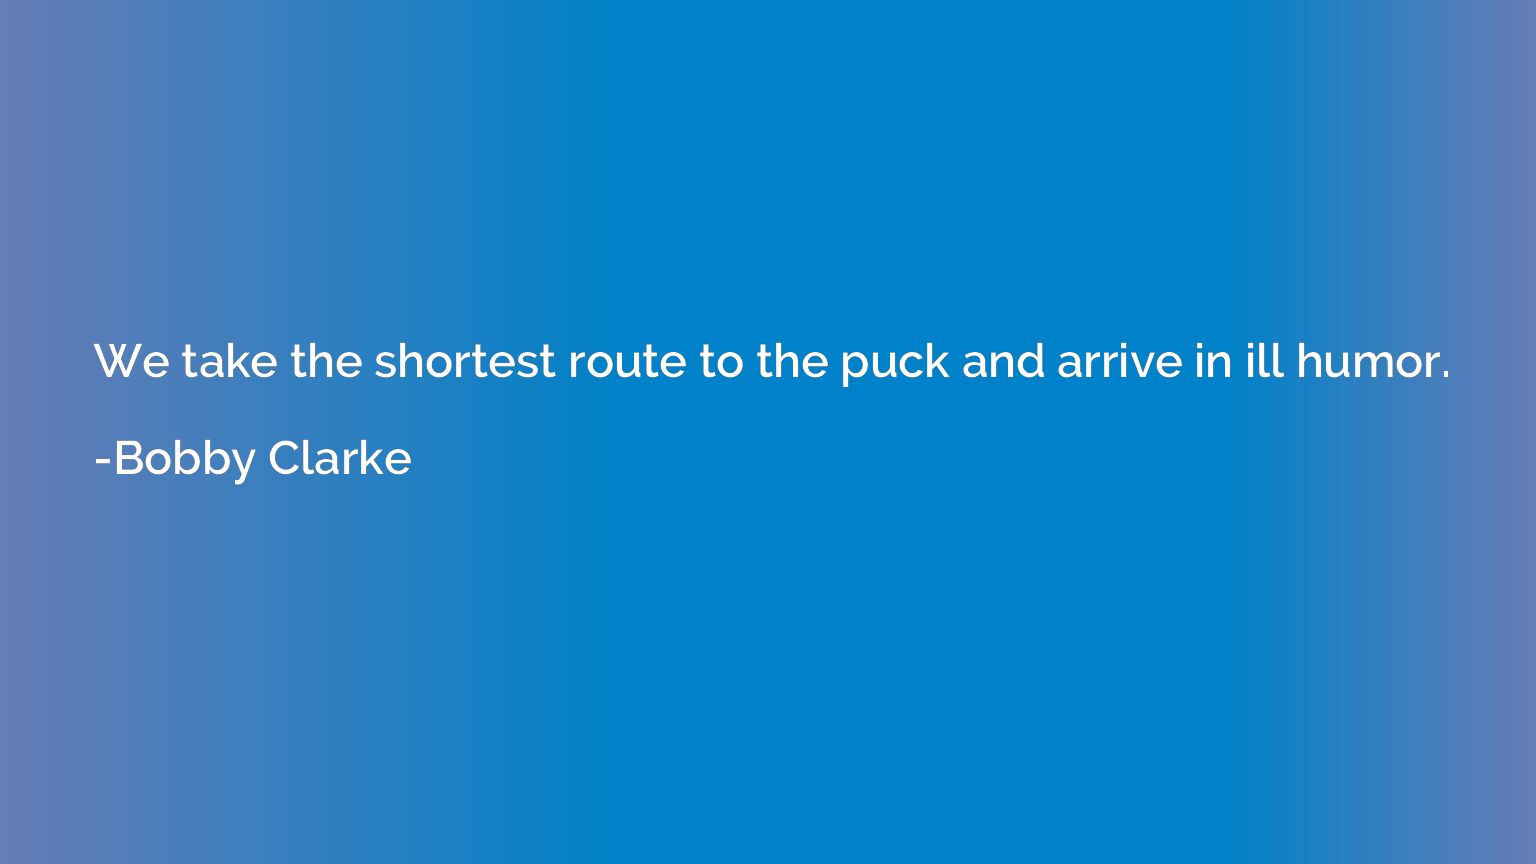 We take the shortest route to the puck and arrive in ill hum